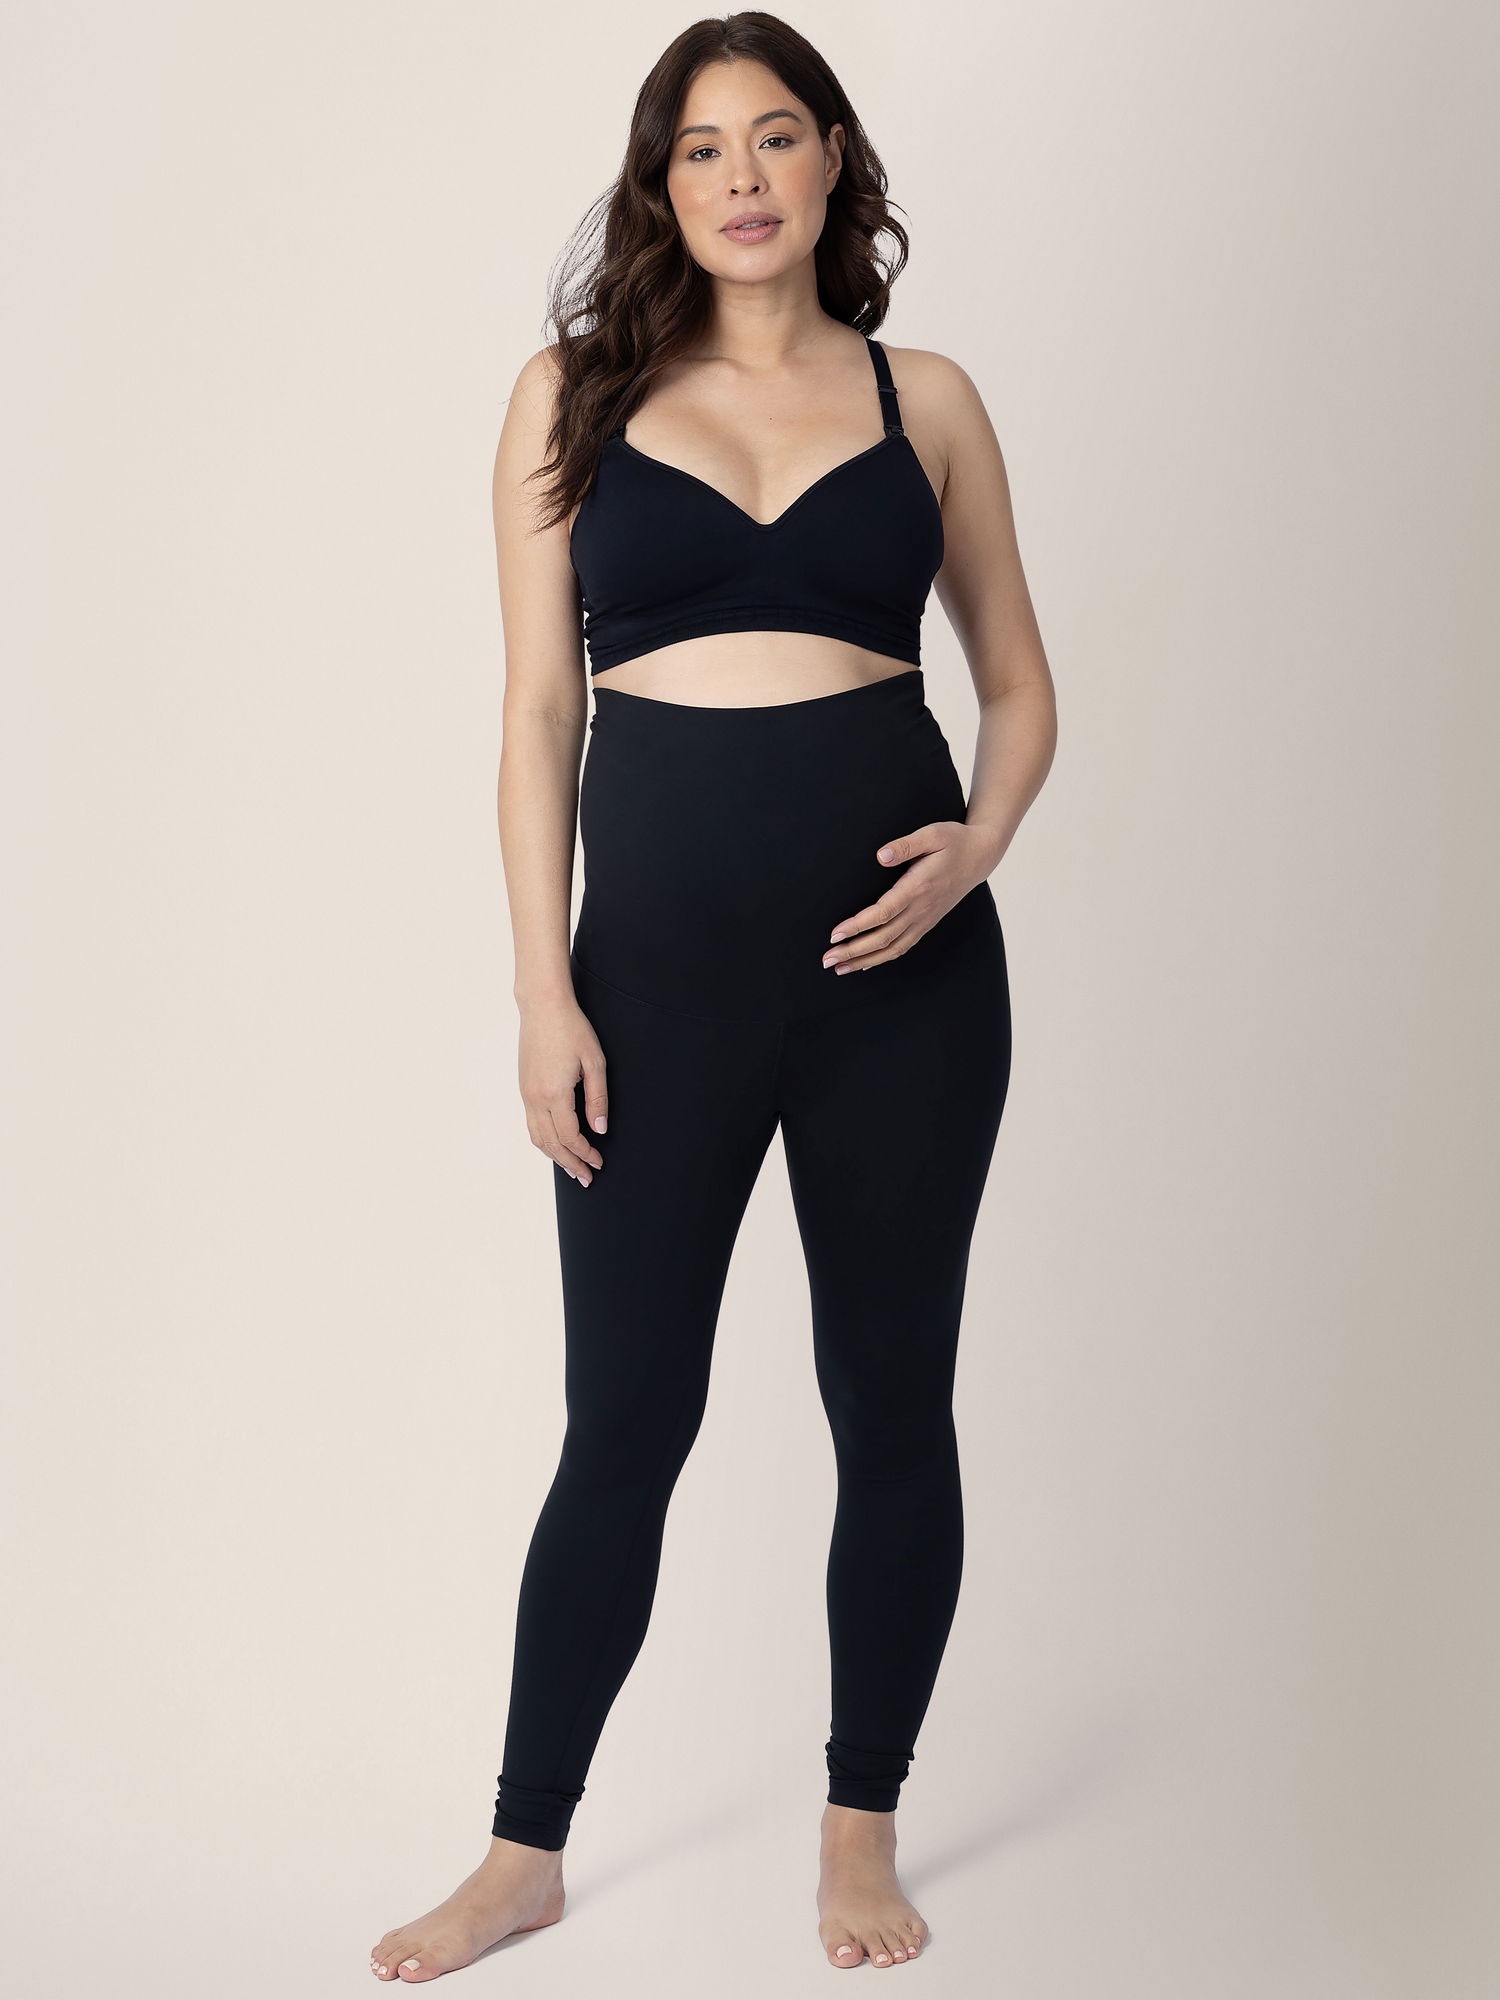 Model wearing the Louisa Maternity & Postpartum Legging in Black classic. @model_info:Vanessa is 5'8" and wearing a Small.